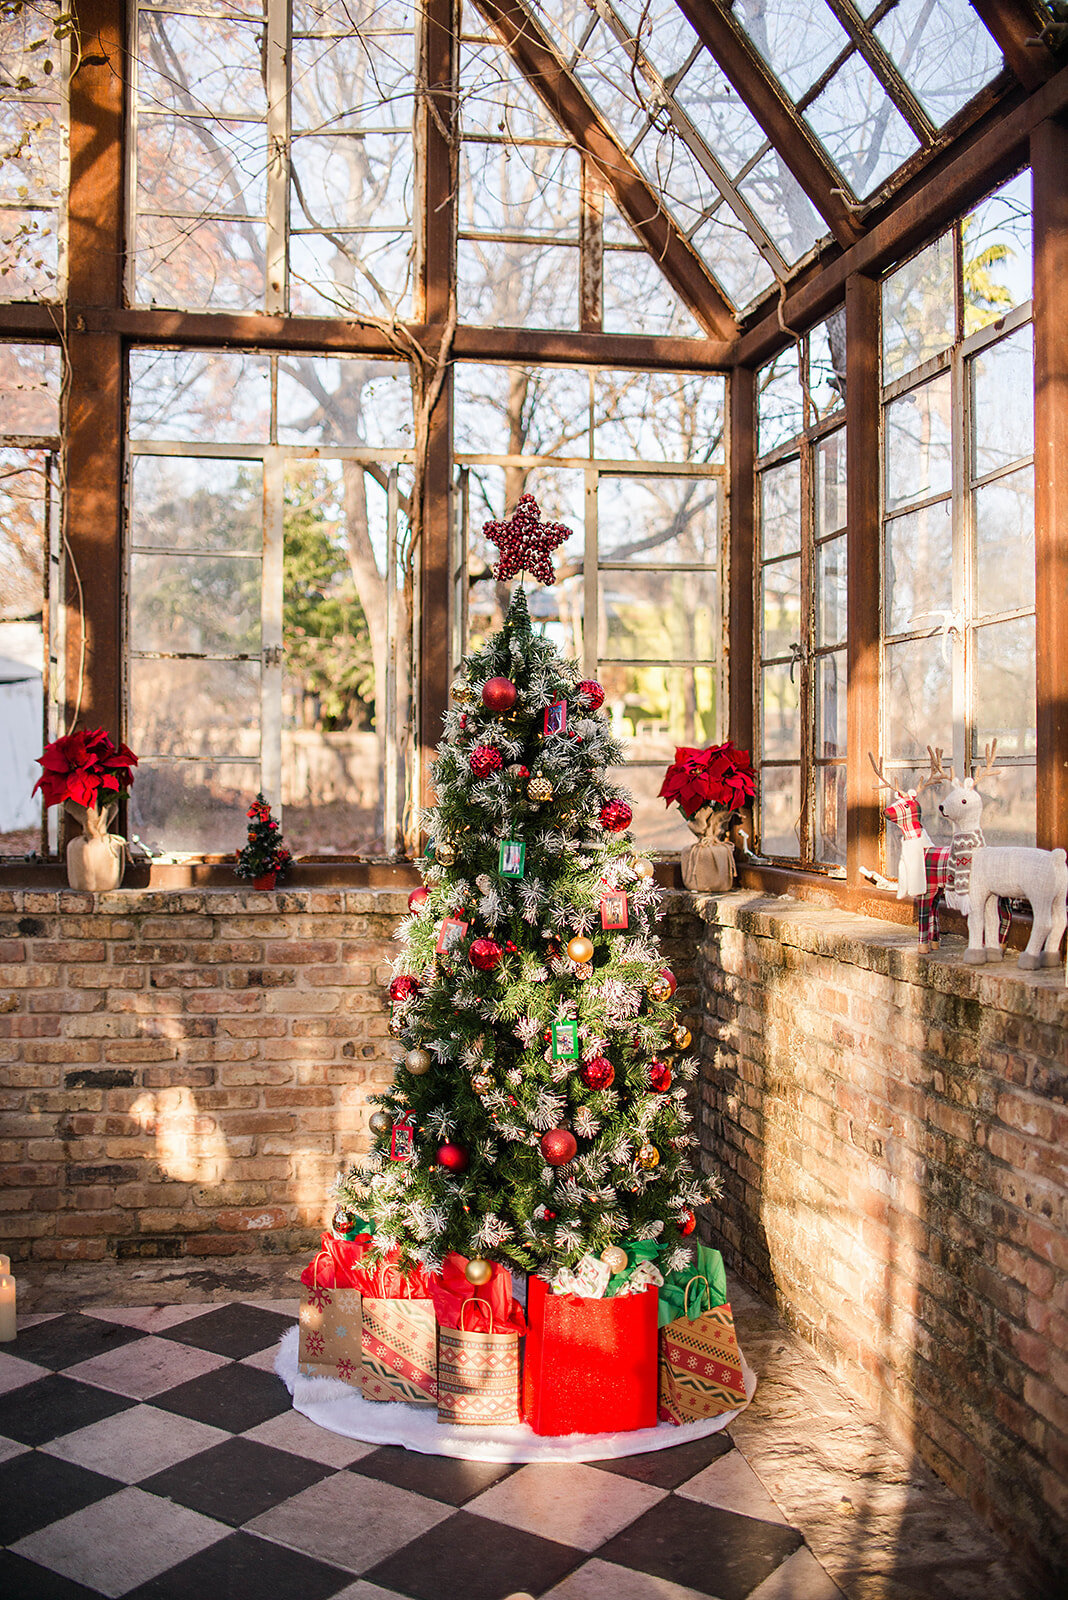 Plan the perfect proposal Christmas tree with gifts